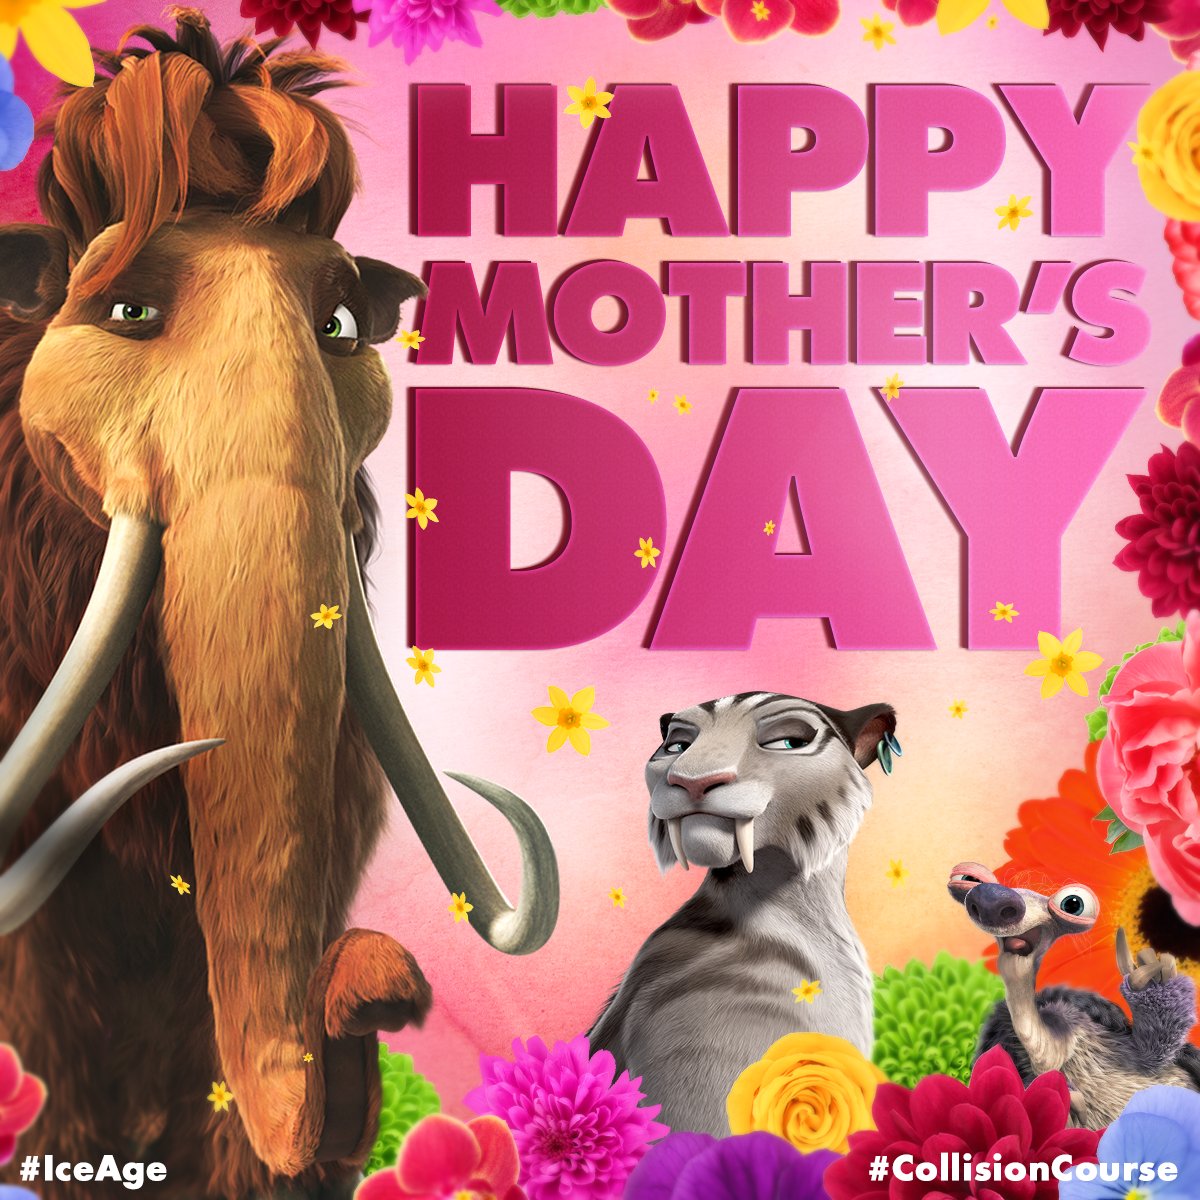 RT @IceAge: Happy #MothersDay to all the cool moms out there. #IceAge #CollisionCourse https://t.co/0z7iejFRzY